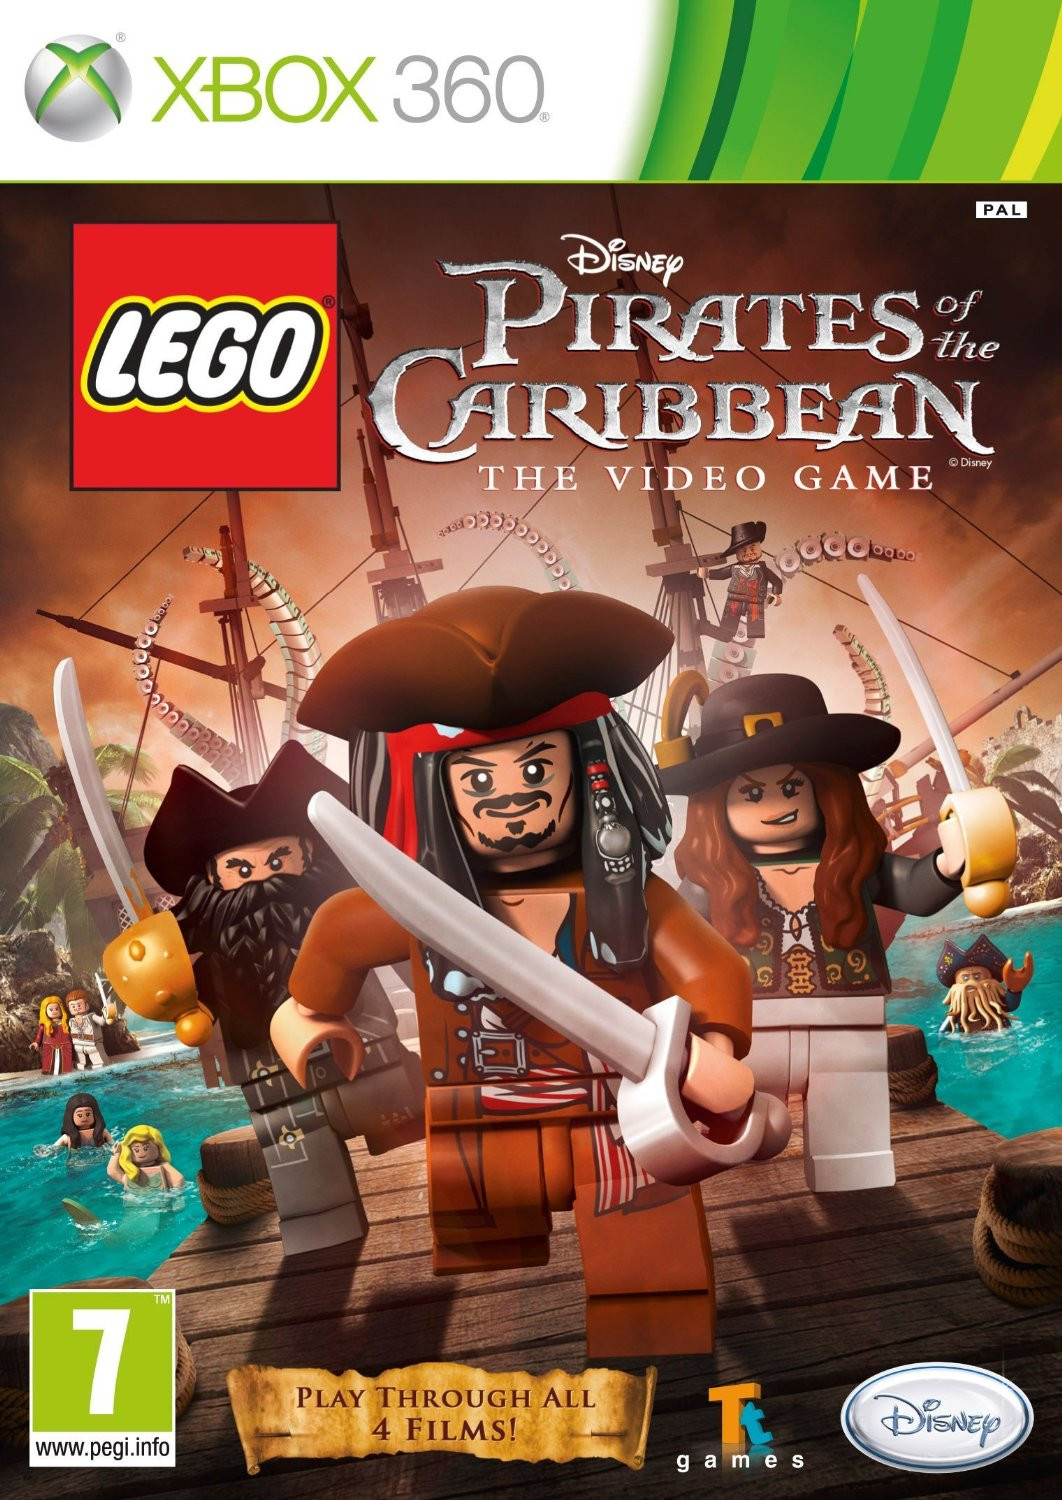 buy-lego-pirates-of-the-caribbean-xbox-360-from-31-98-today-best